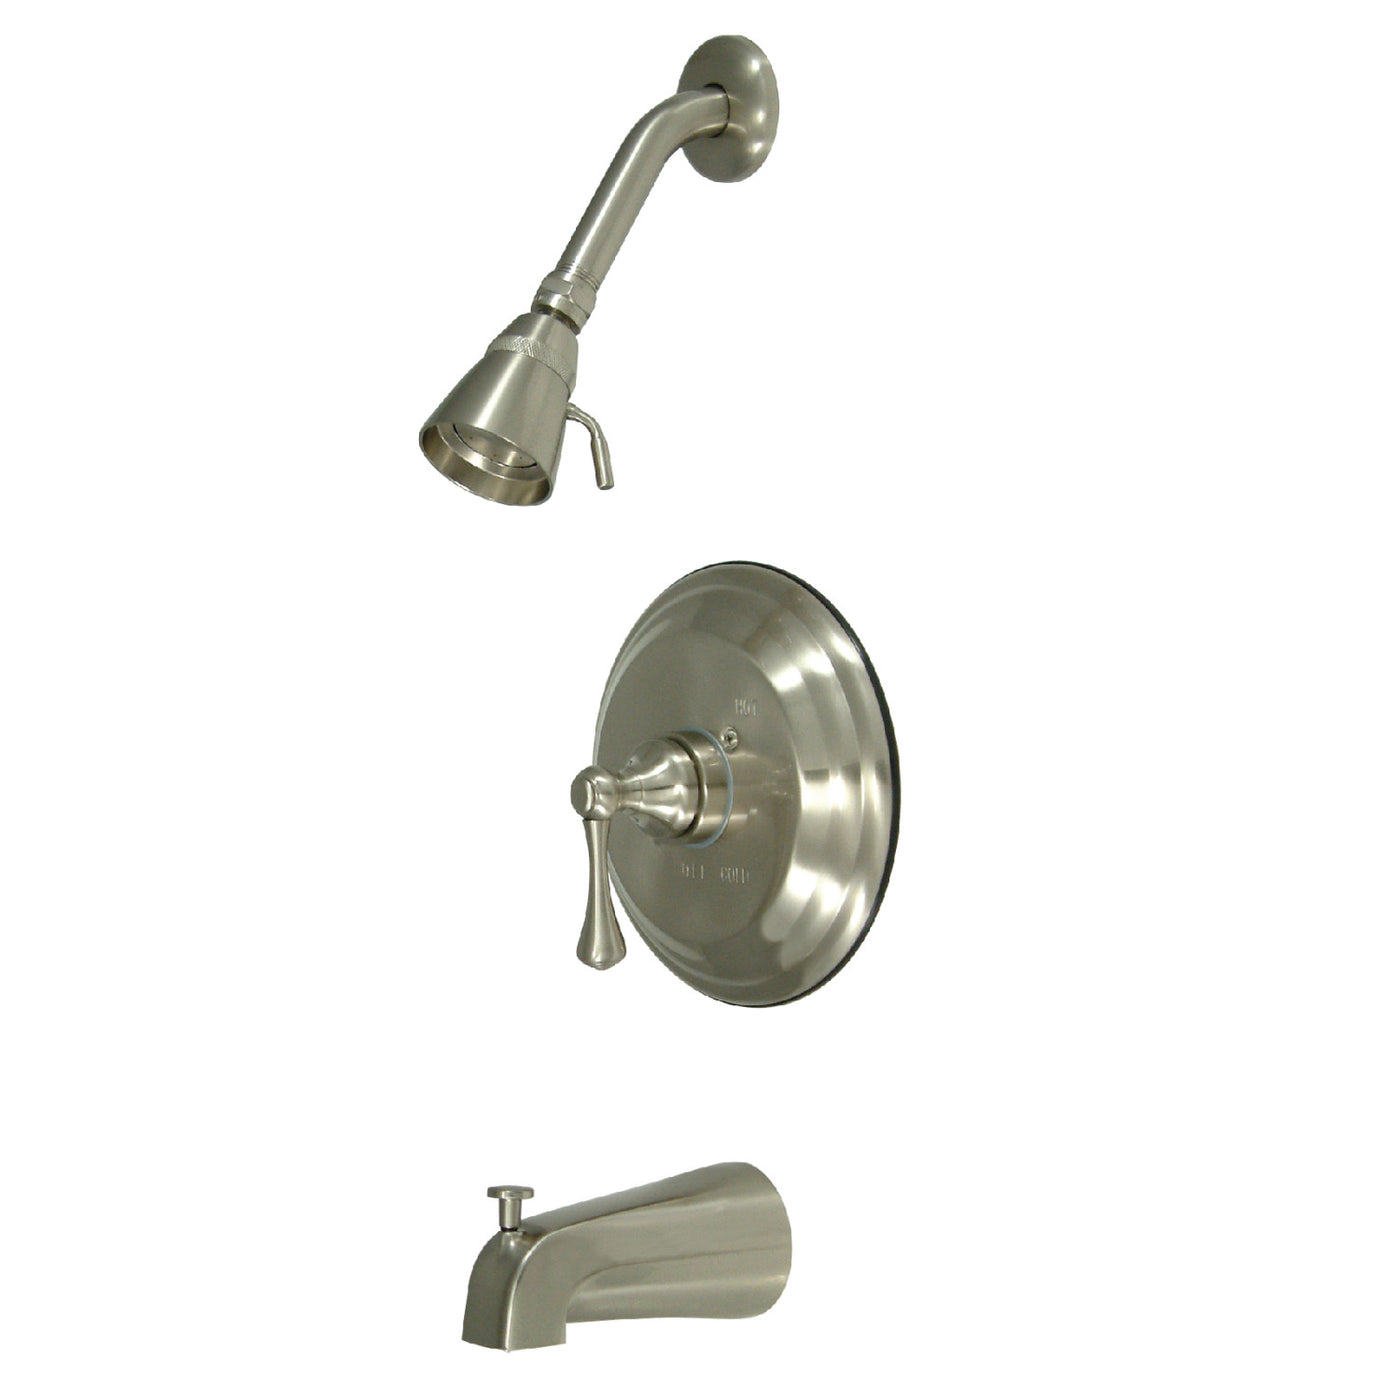 Elements of Design EB2638BL Tub and Shower Faucet, Brushed Nickel